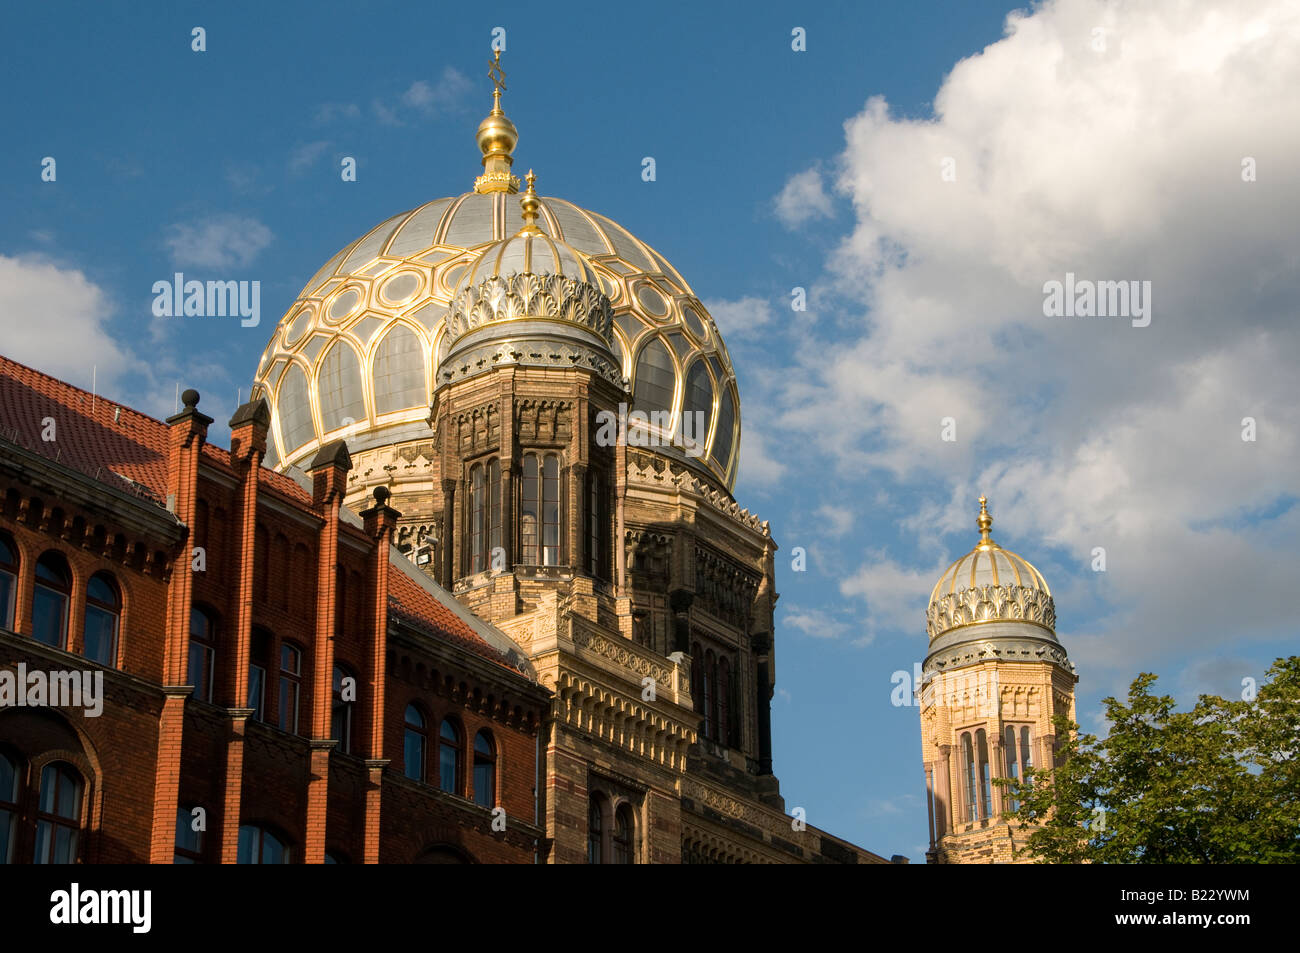 The mid-19th century Neue Synagoge New Jewish synagogue decorated with distinct Moorish style located on Oranienburger street in Berlin Germany Stock Photo